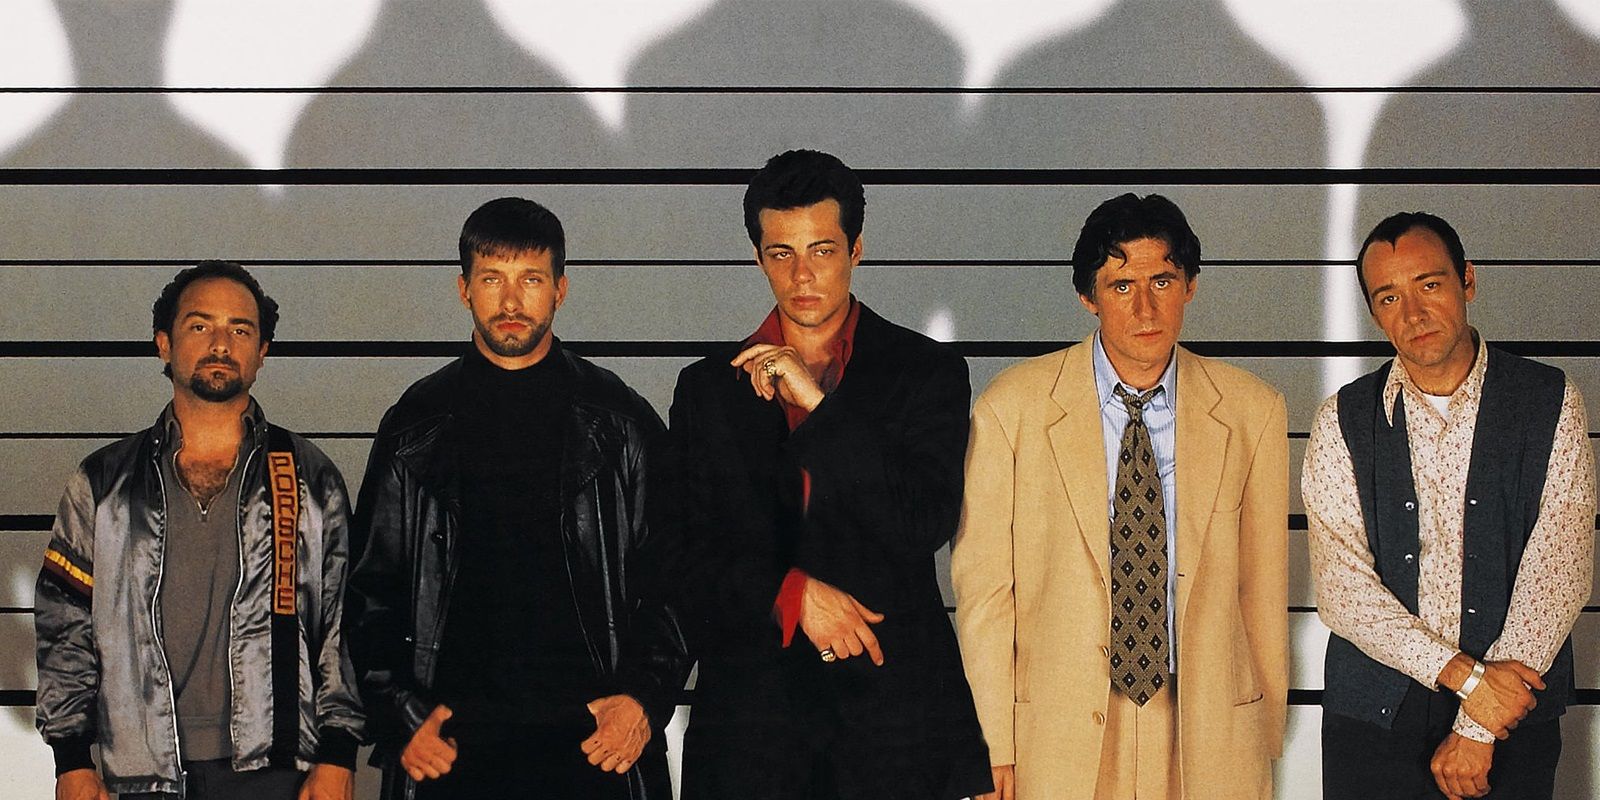 The police lineup in The Usual Suspects